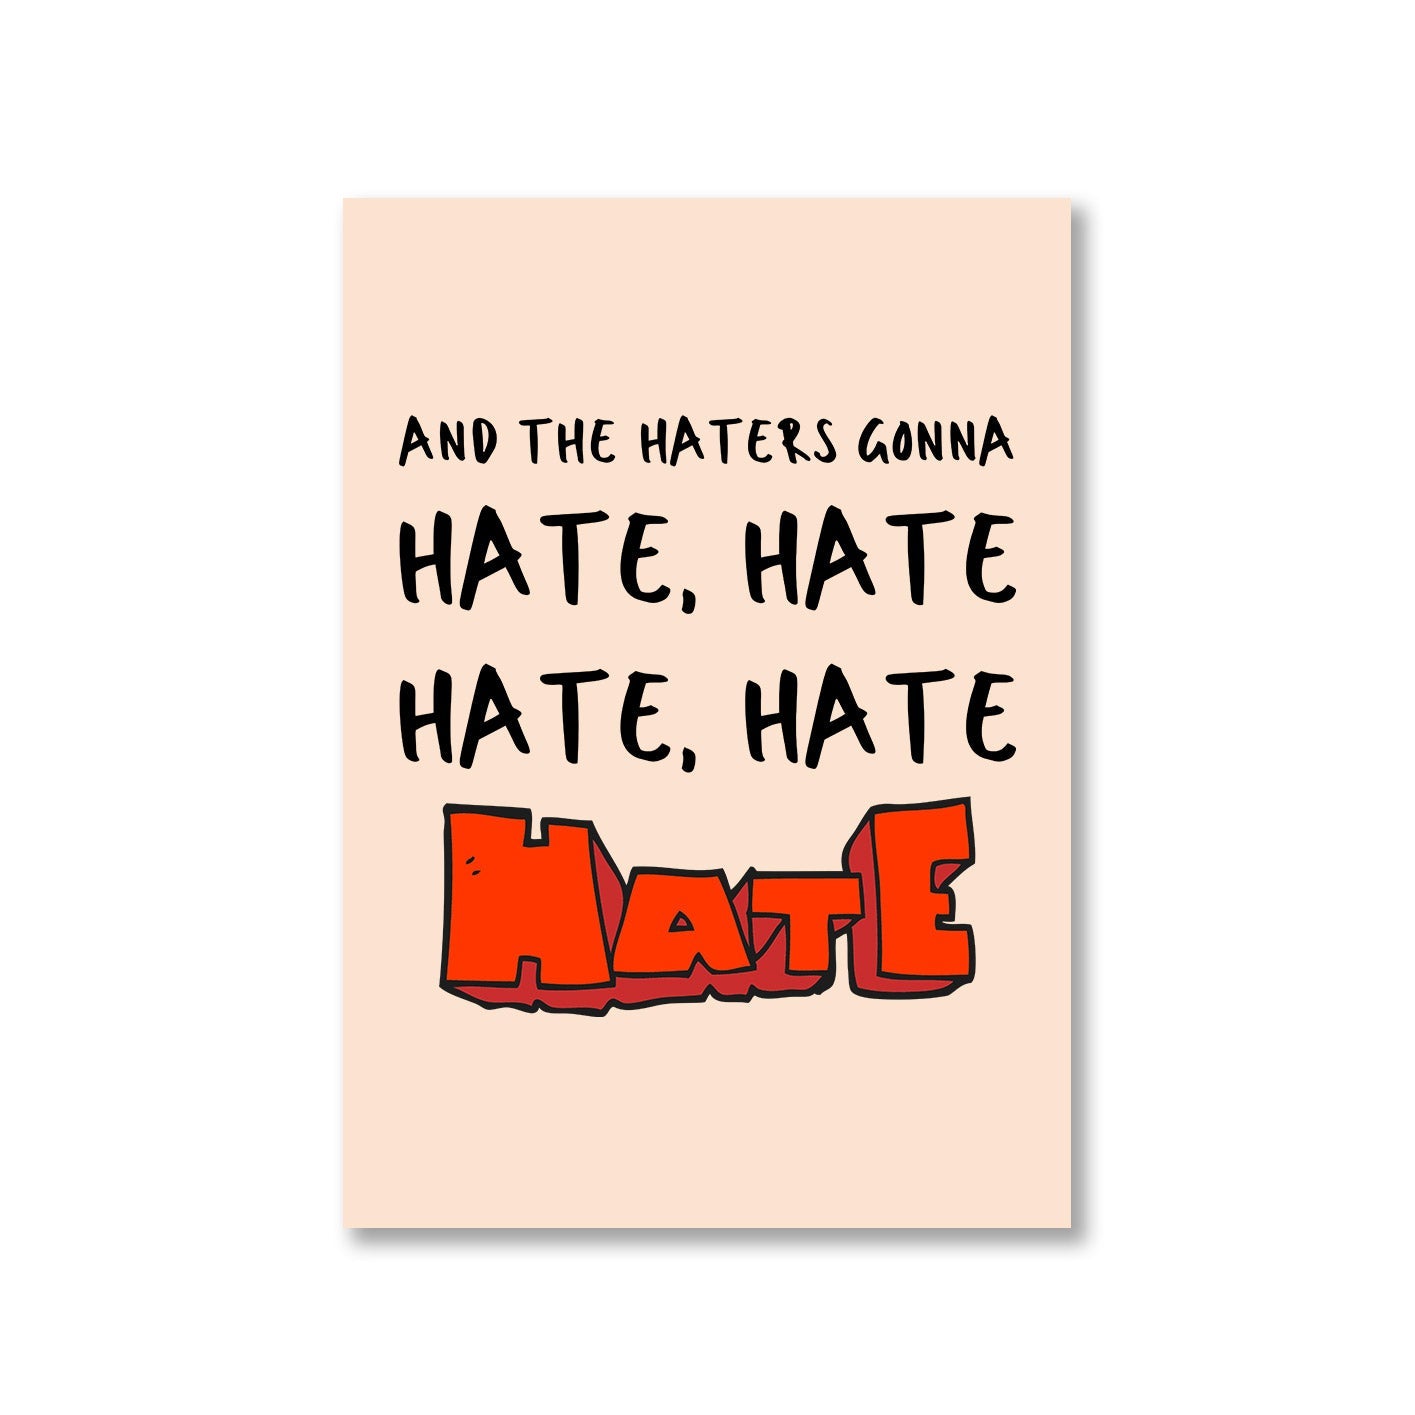 taylor swift haters gonna hate poster wall art buy online united states of america usa the banyan tee tbt a4 